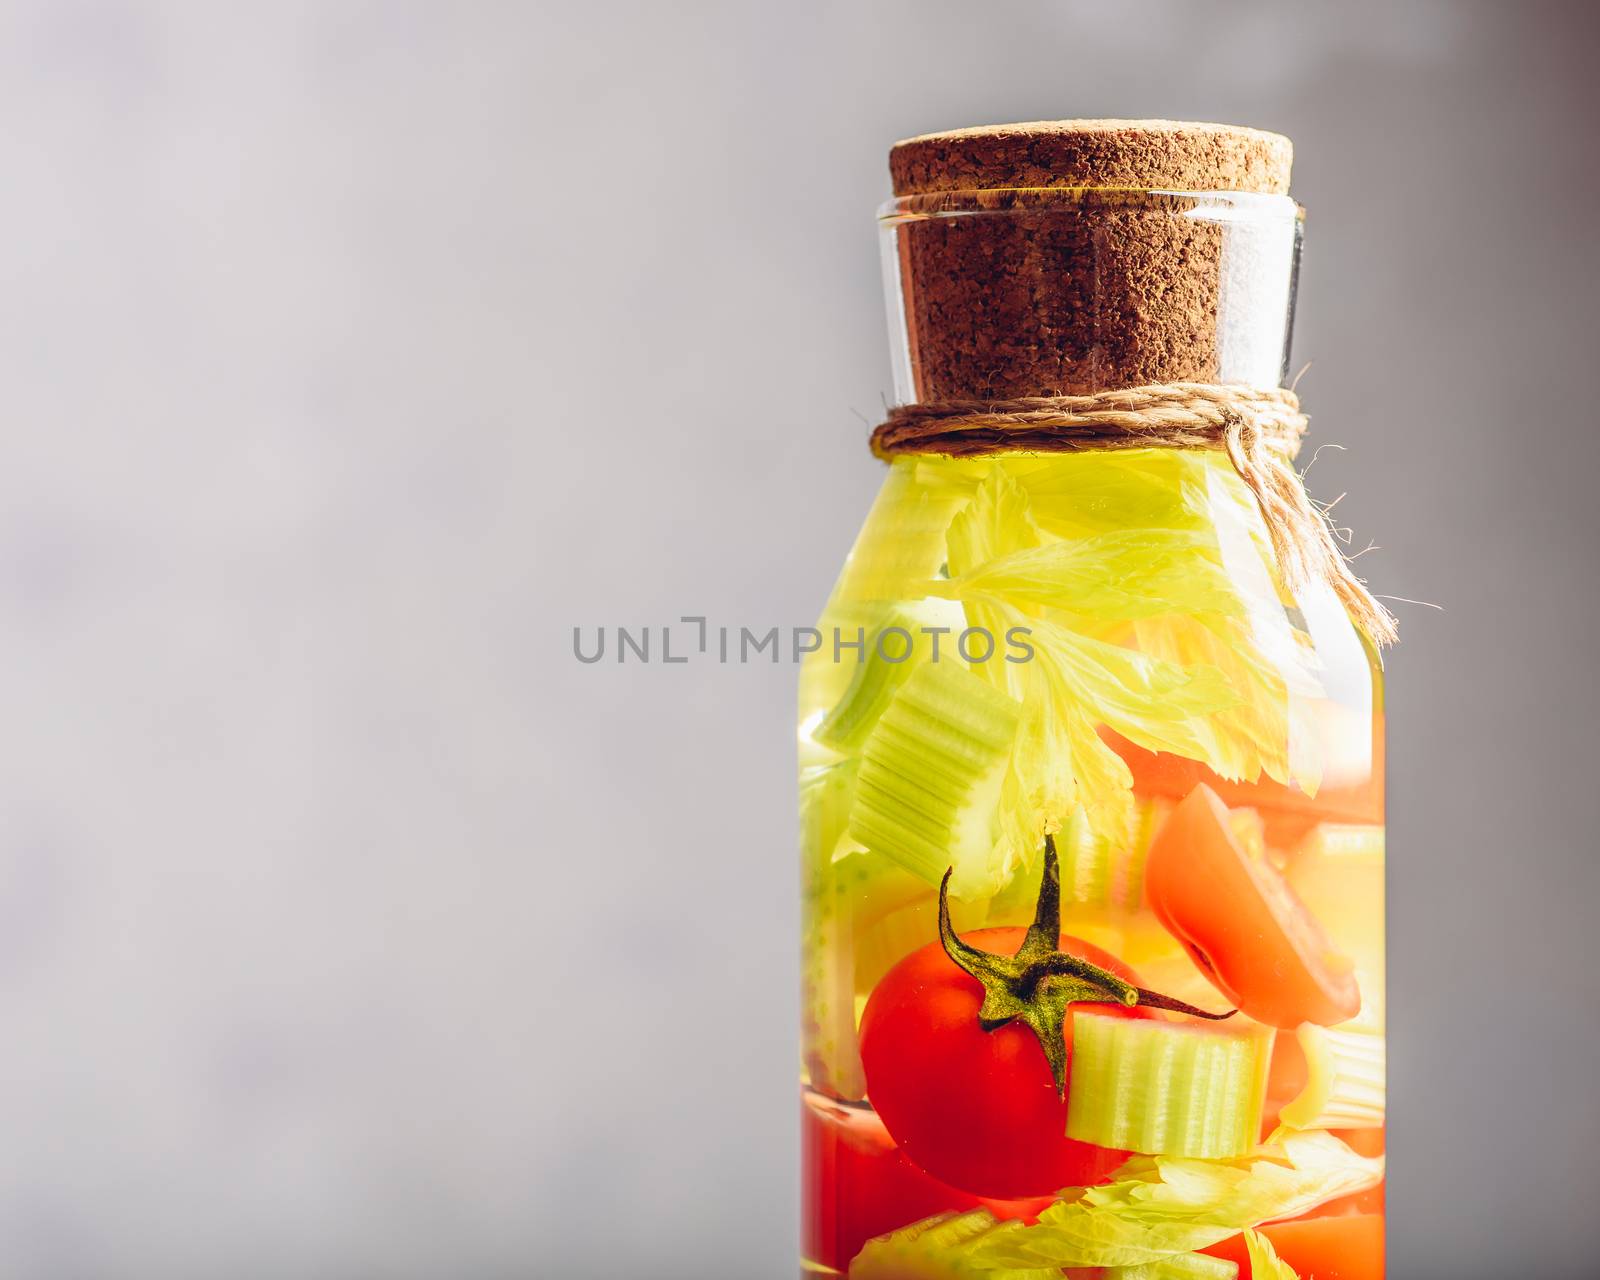 Part of Bottle with Water Infused with Cherry Tomato and Celery Stems. Copy Space on the Left.